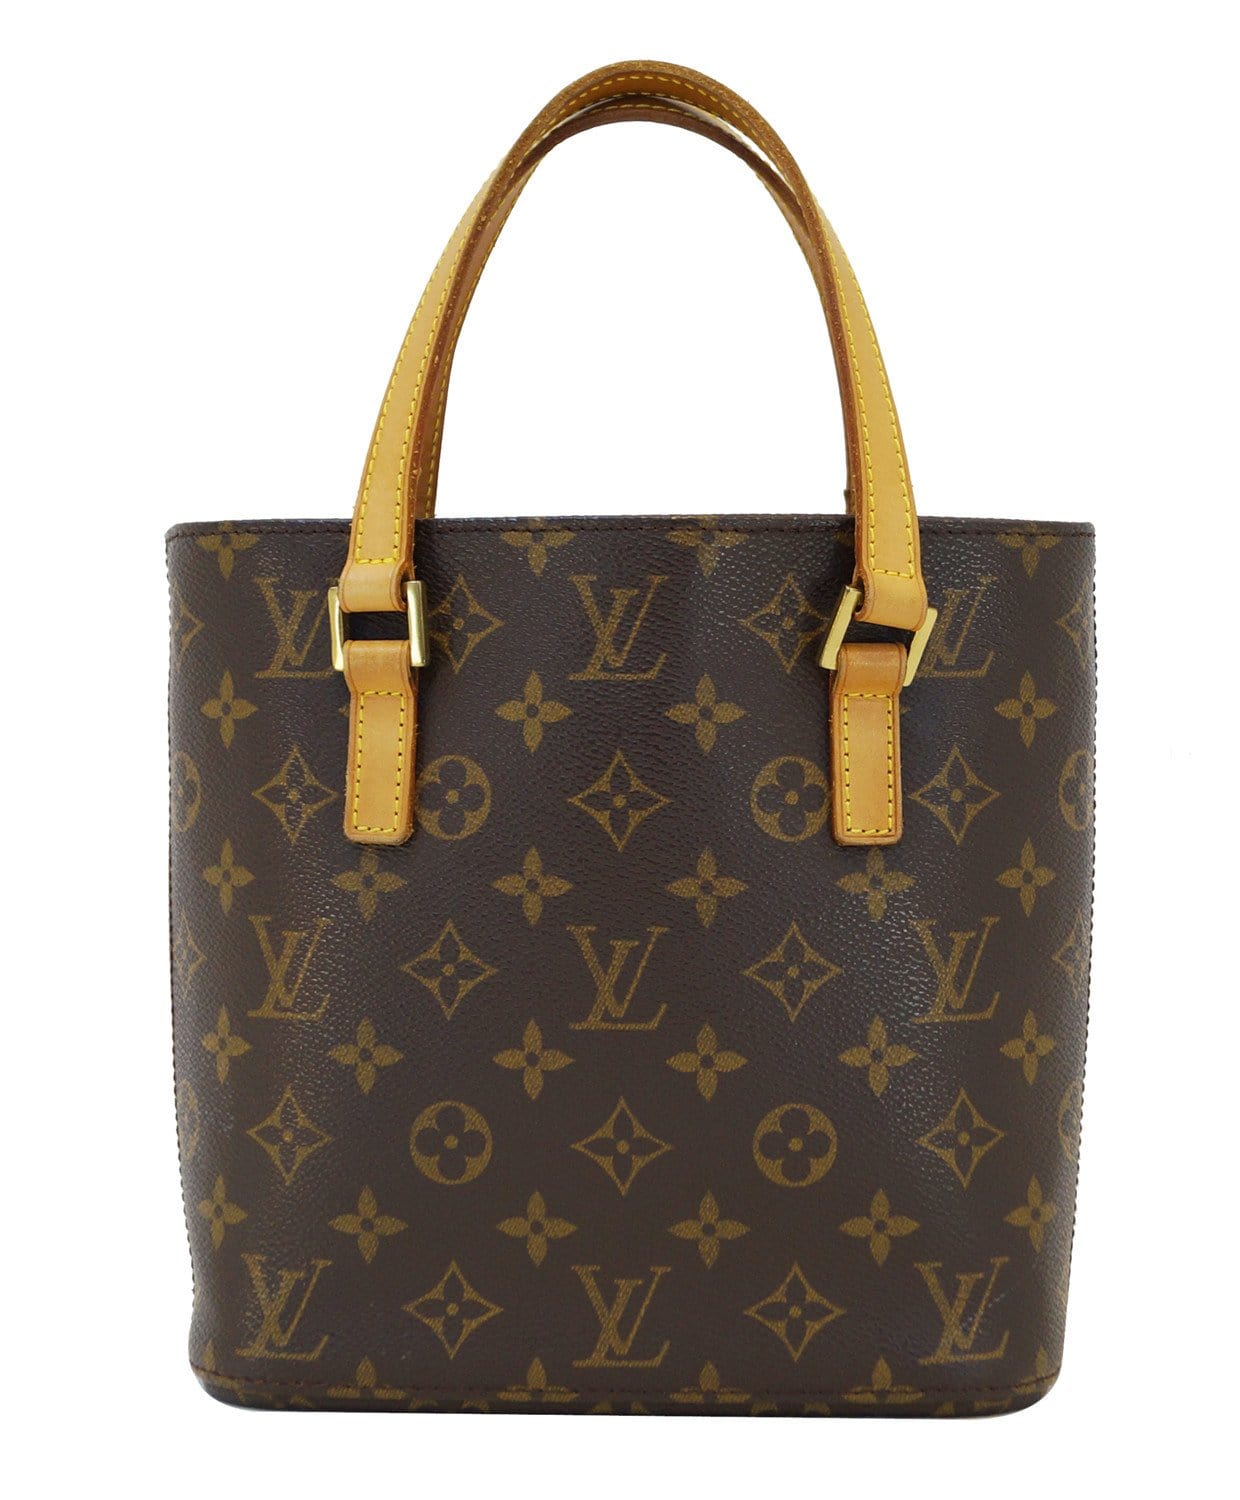 What's In My Bag!! Louis Vuitton Monogram Totally PM Tote Handbag Review 